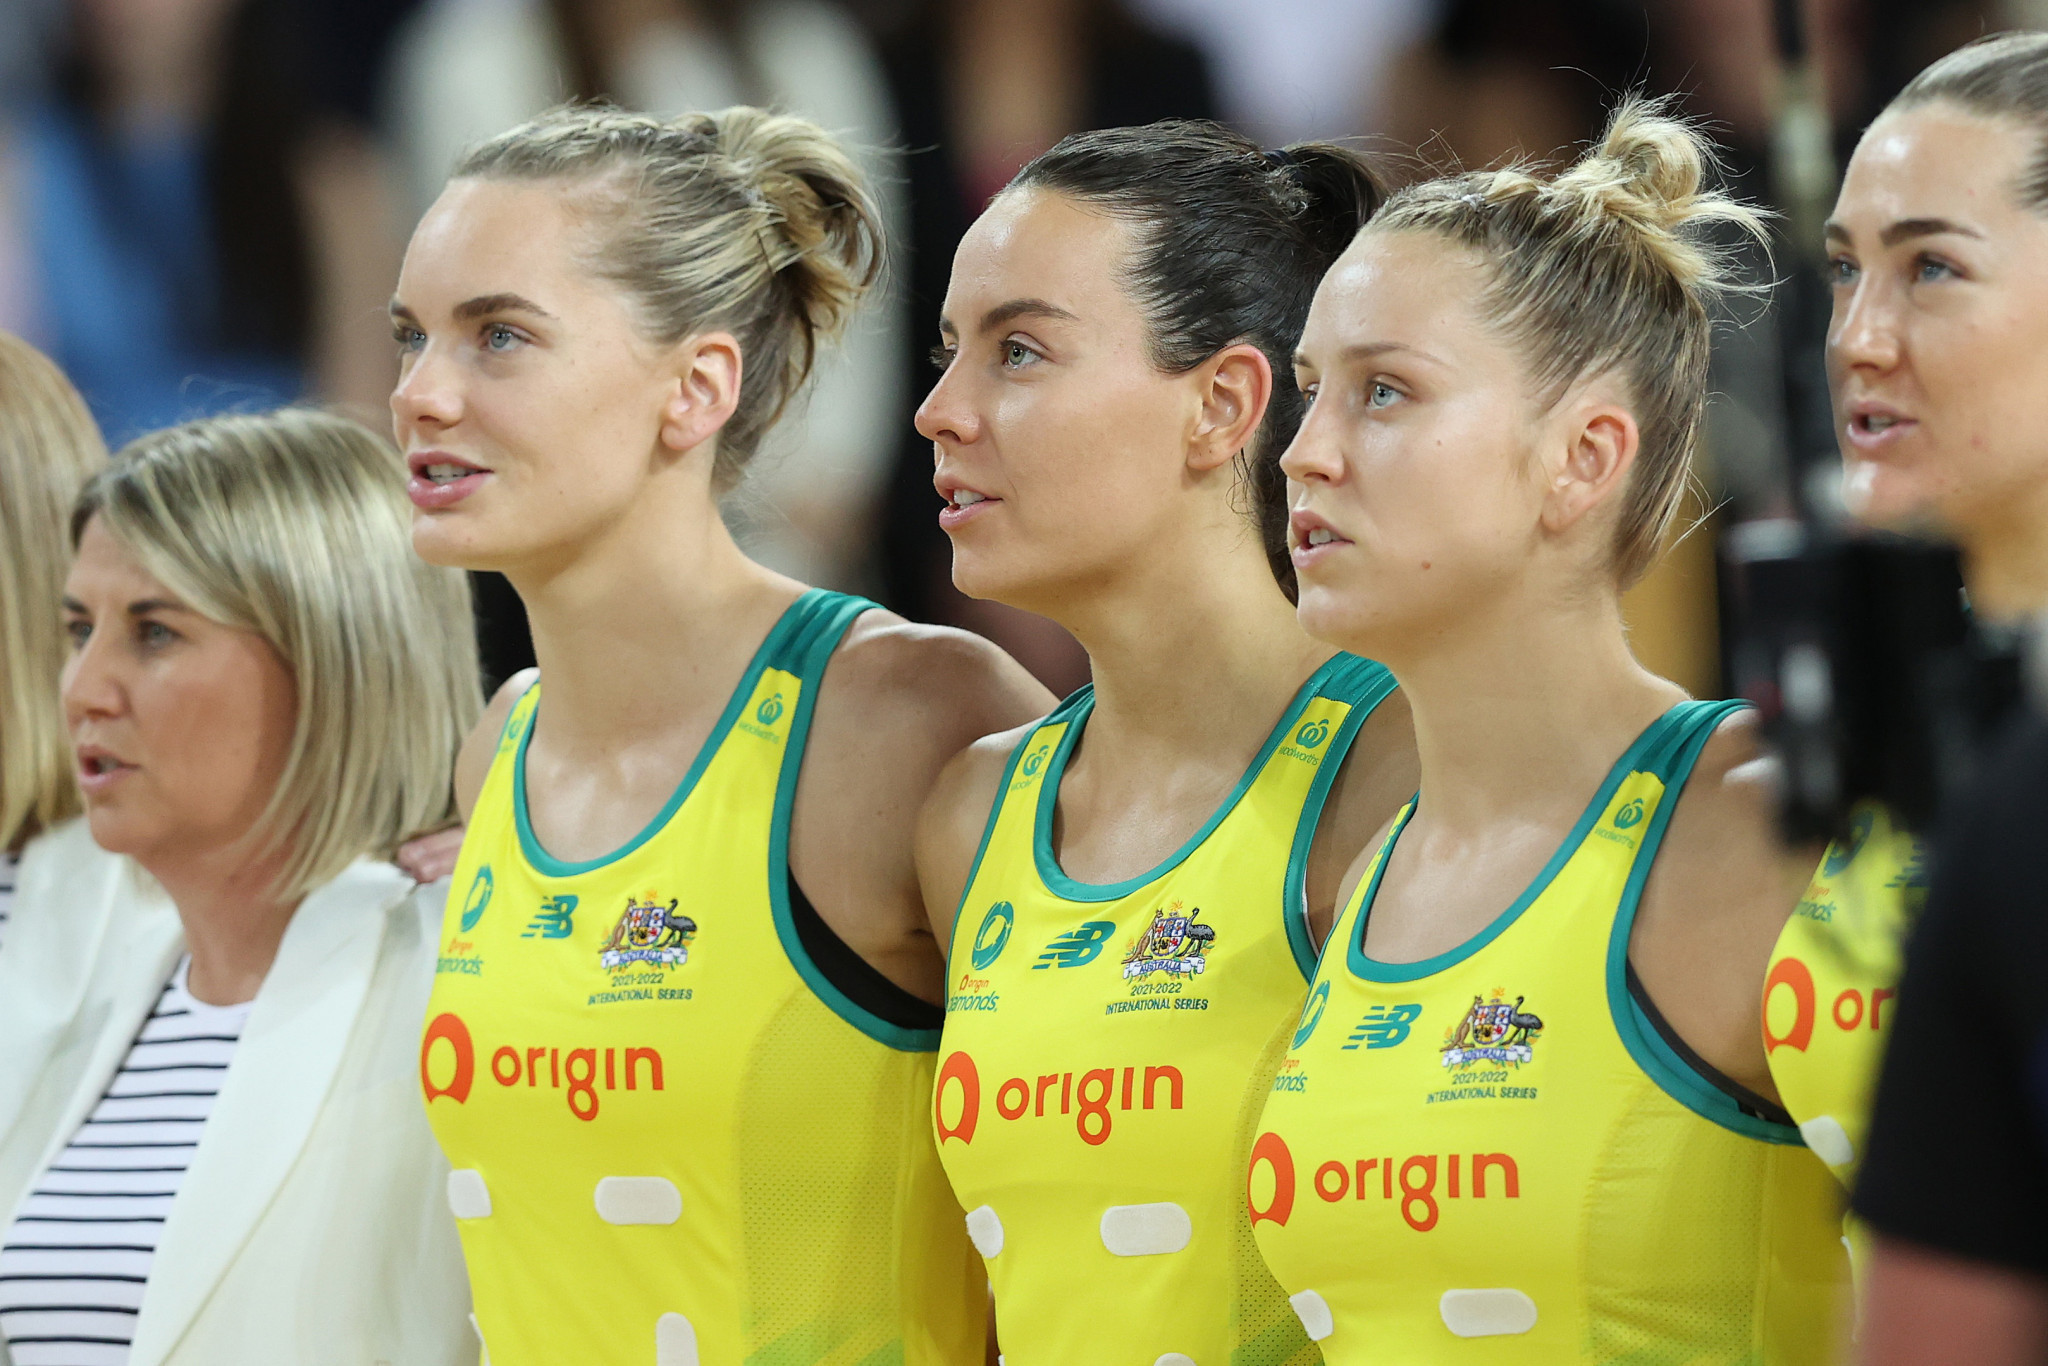 Key sponsors of Netball Australia have confirmed they will remain despite the collapse of the major deal involving mining company Hancock Prospecting ©Getty Images